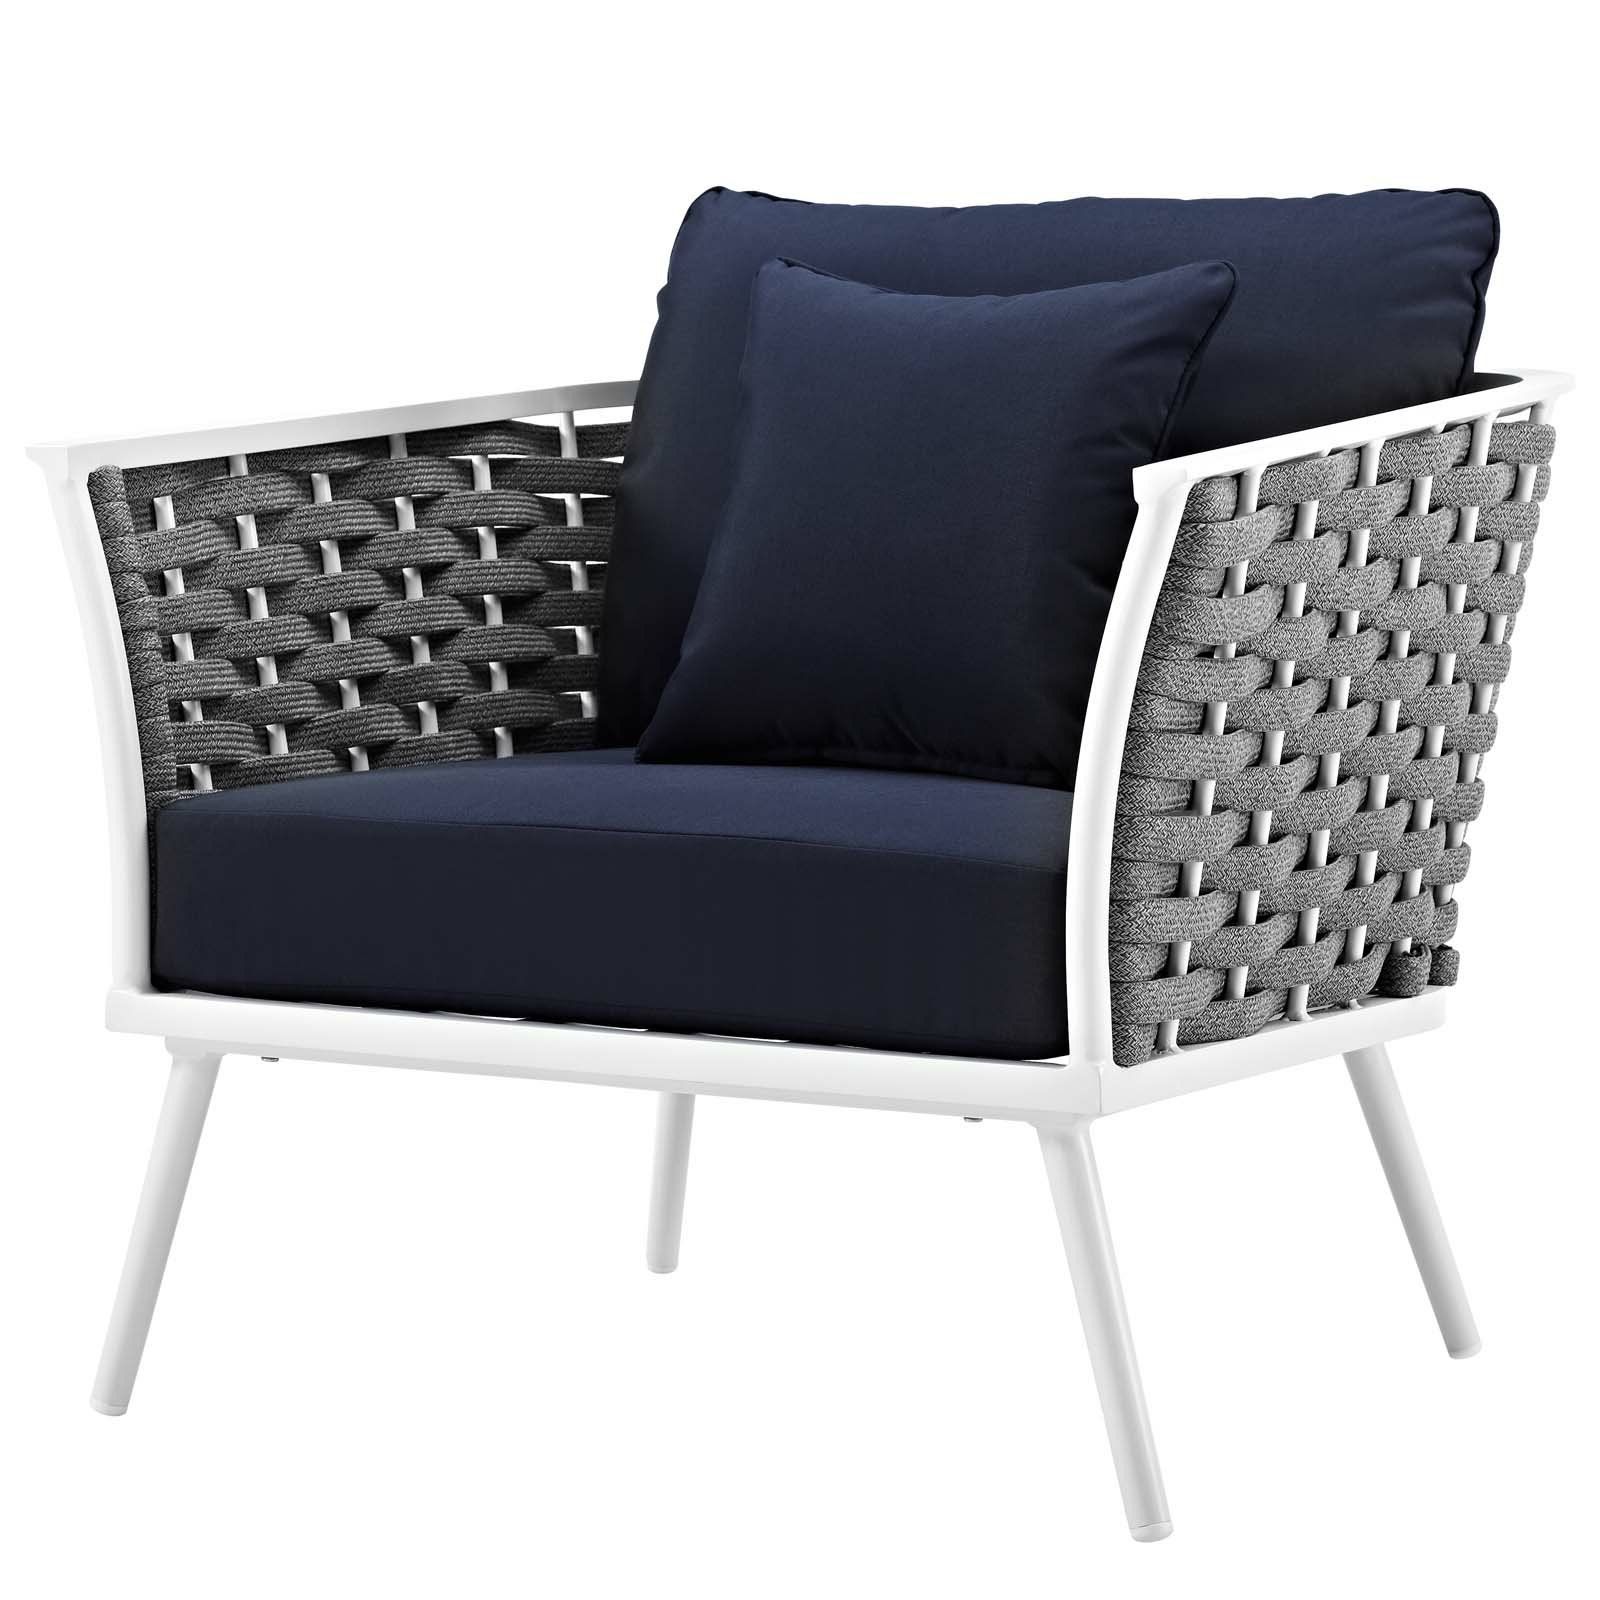 Rossville Patio Chair With Cushions For Best And Newest Rossville Outdoor Patio Sofas With Cushions (View 1 of 25)